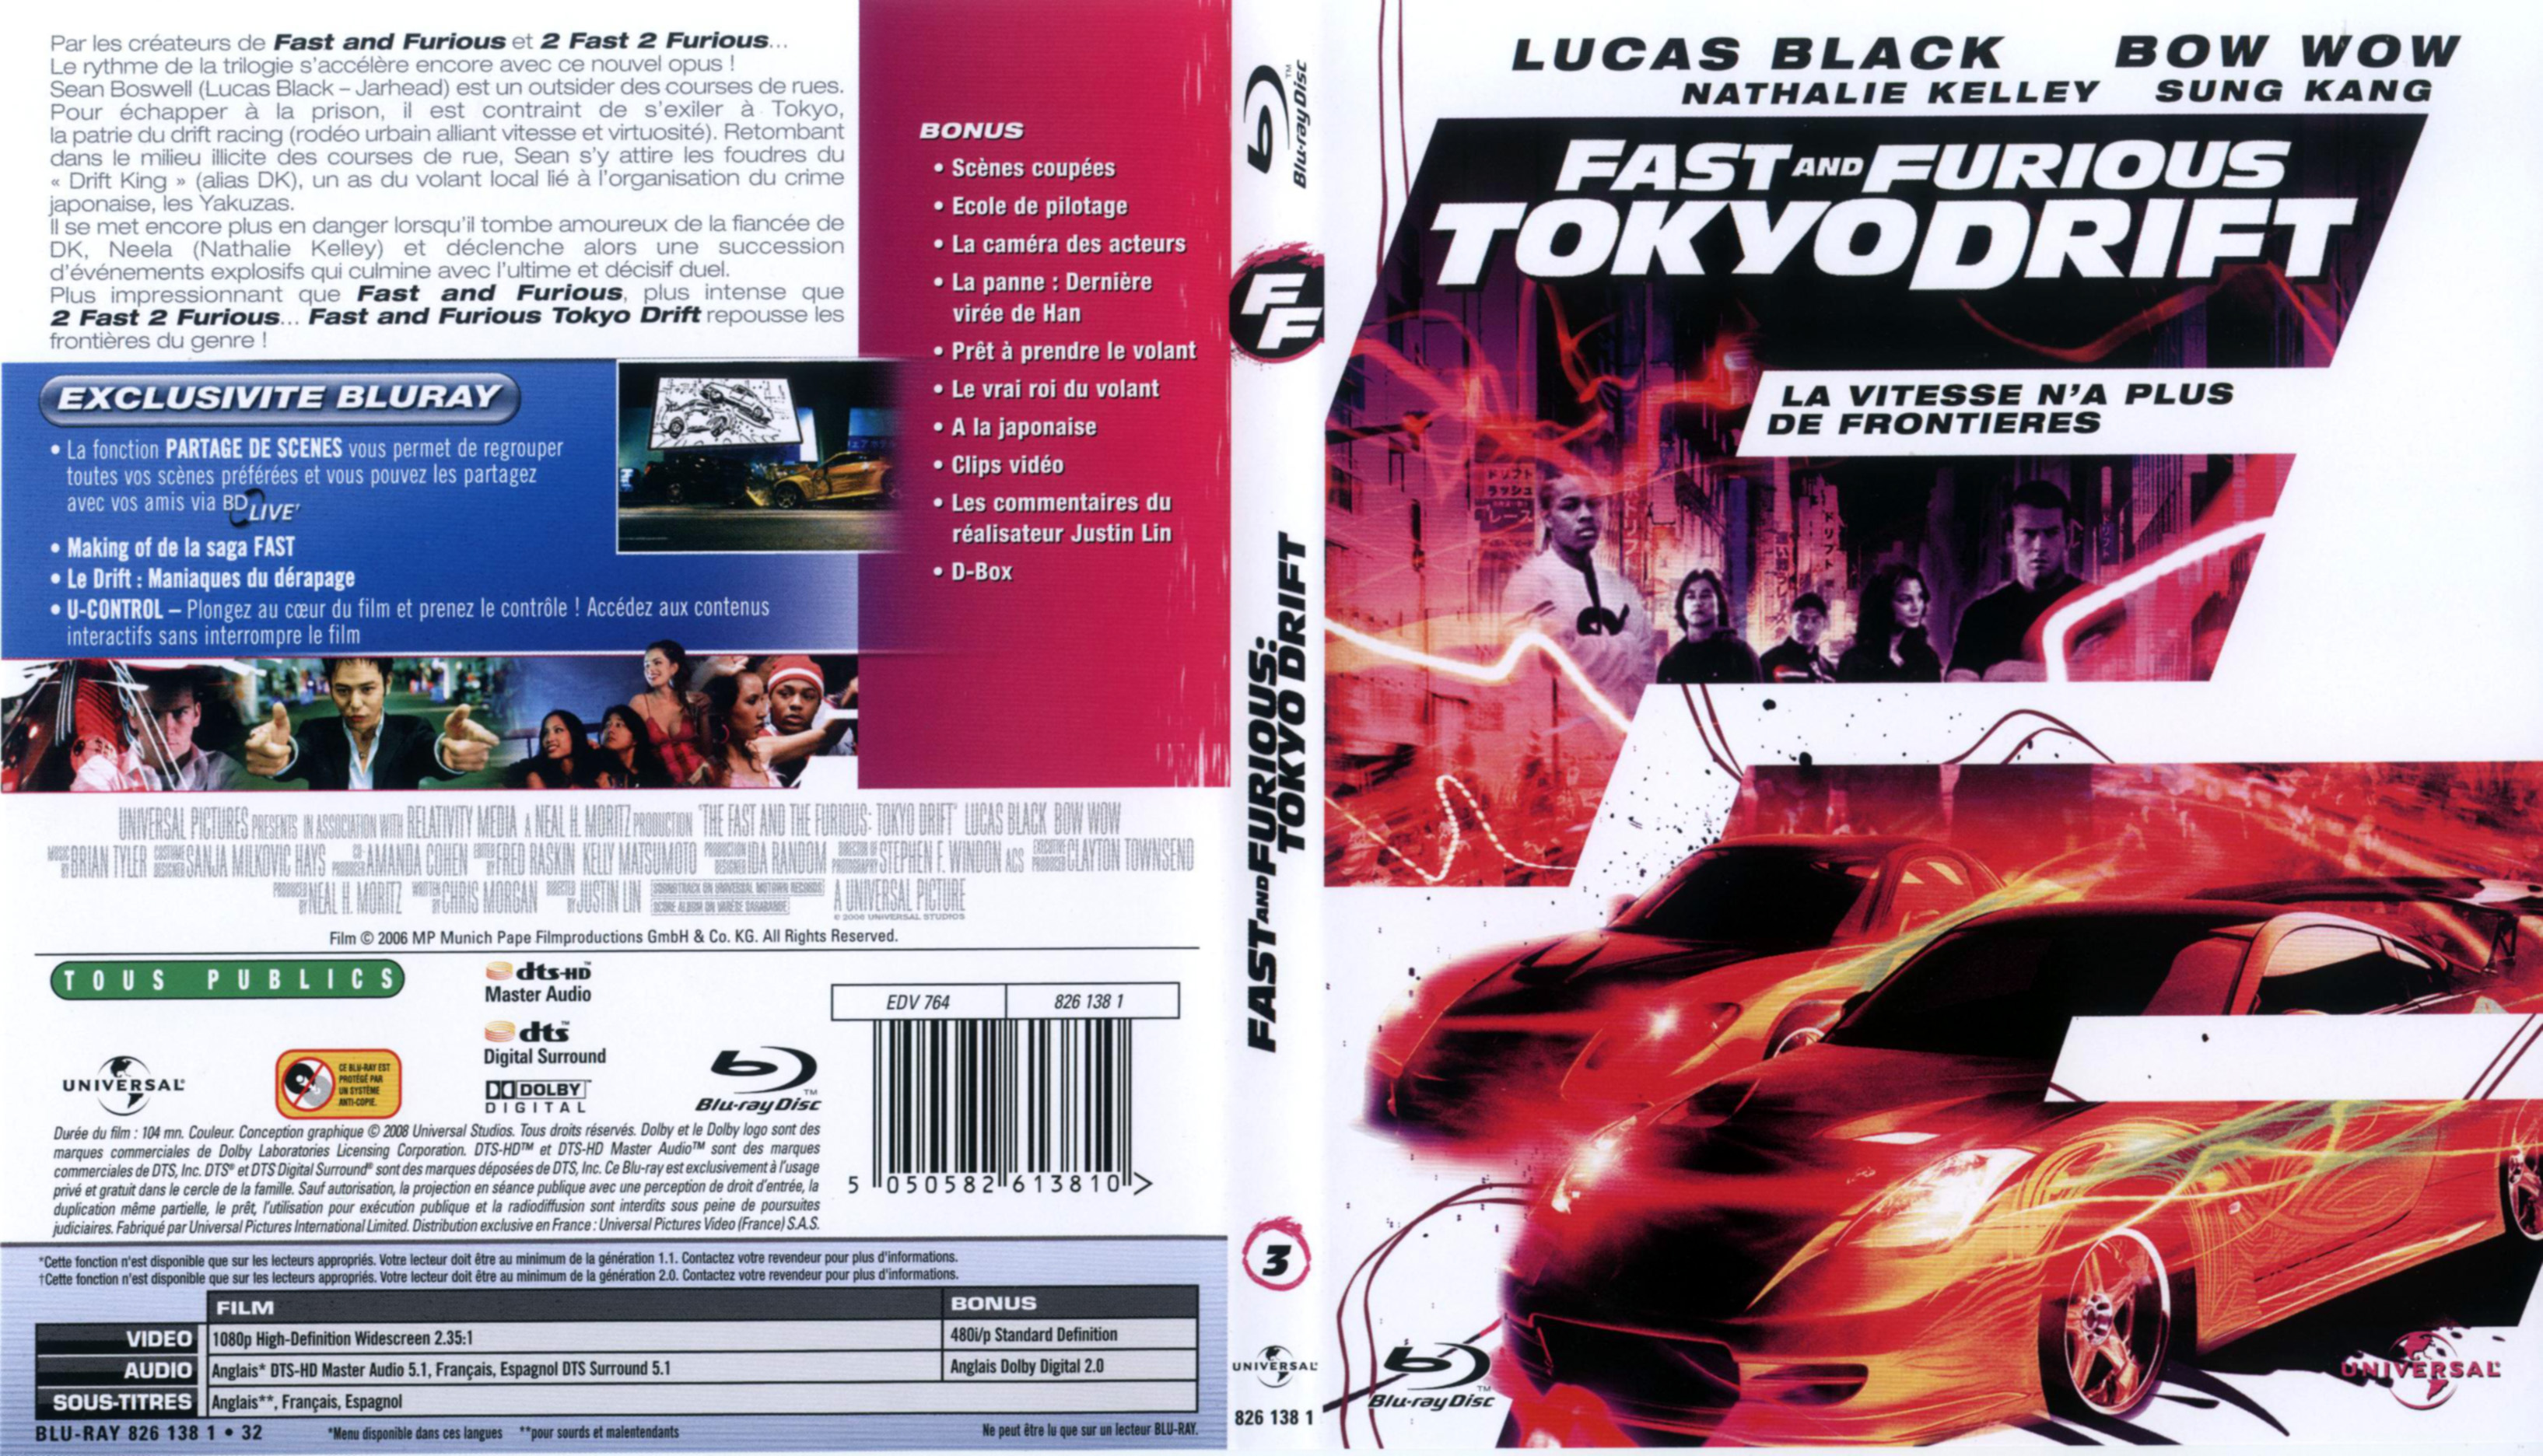 Jaquette DVD Fast and Furious Tokyo Drift (BLU-RAY)